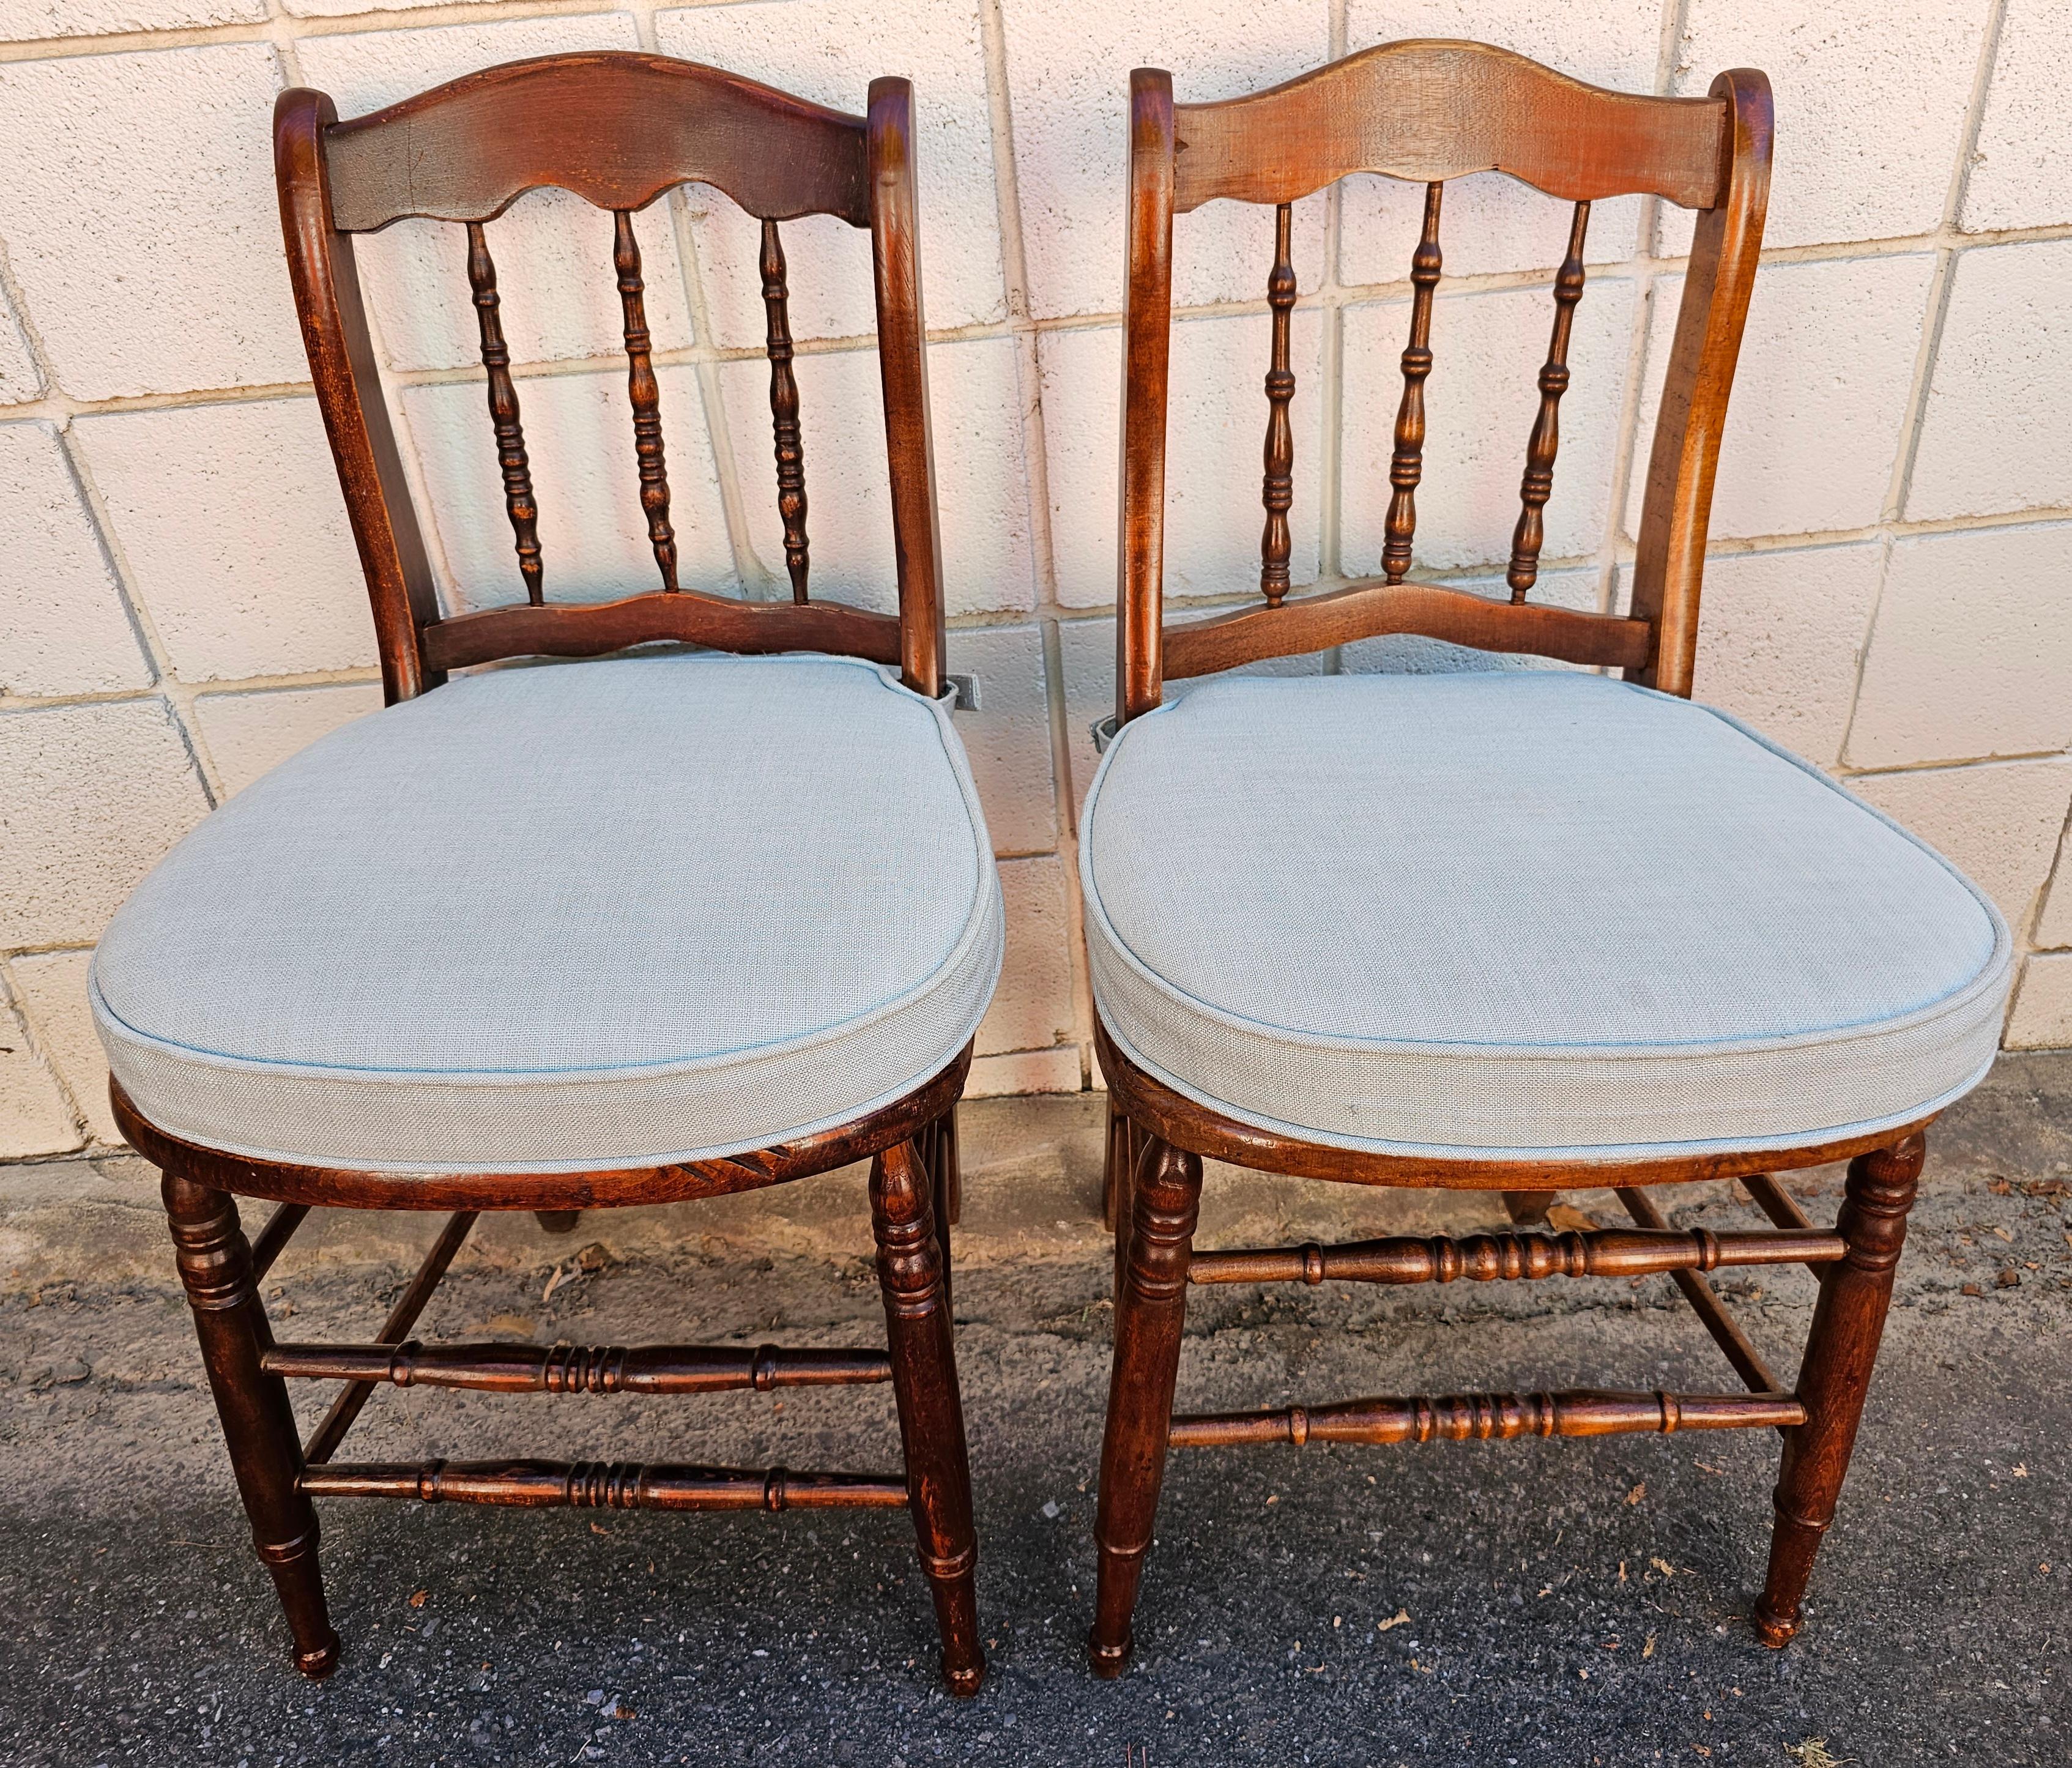 Pair of Victorian Mahogany Spindle back and Cane Seat Side Chairs with Custom Cushion in good antique condition. Custom zippered cushions ( blue sky) in good condition. They attached to the chairs with velcro. Faux Cane Seat are in great shape.